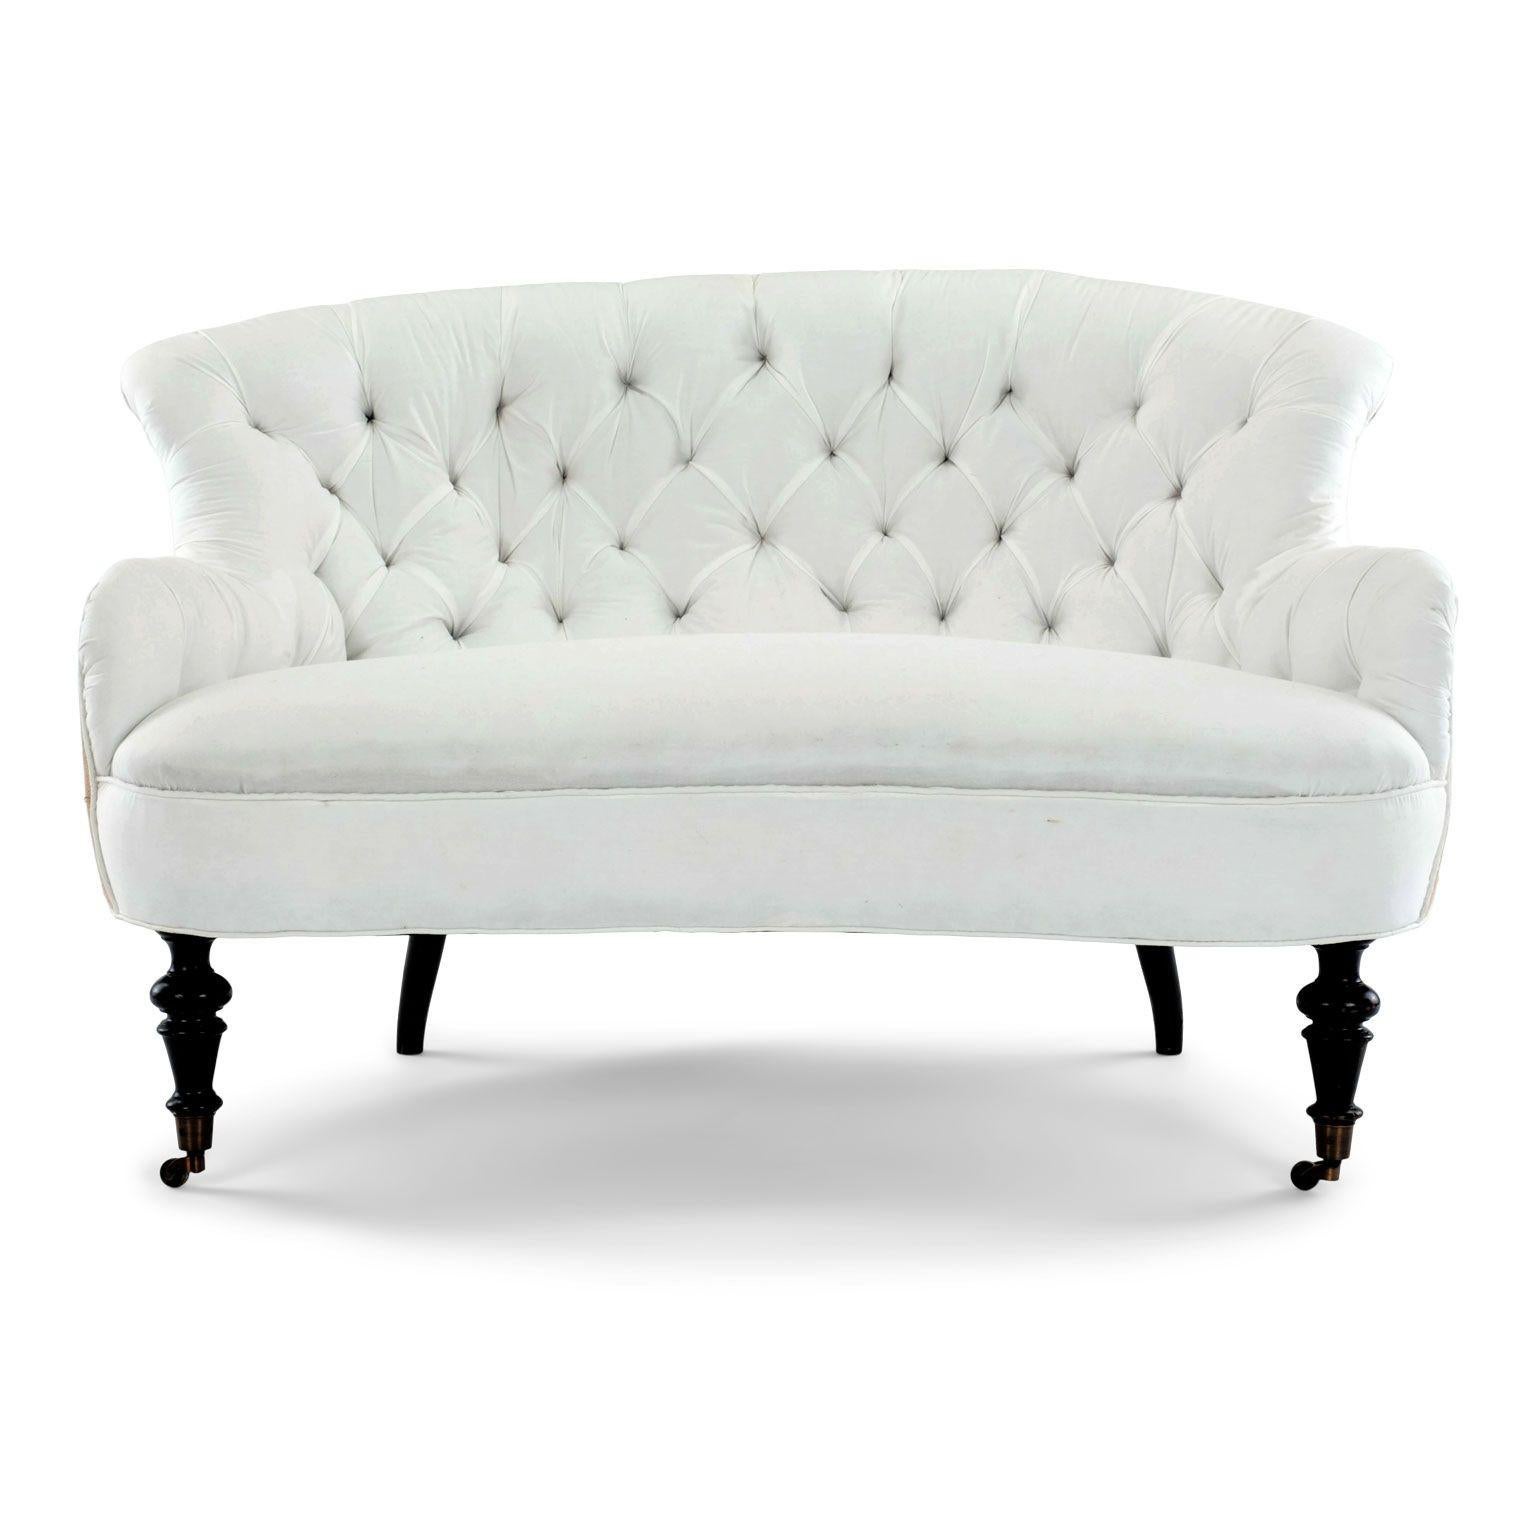 Napoleon III French settee upholstered in off-white ticking and burlap. Ready to be re-covered in your own fabric. Constructed circa 1870-1889 with wood and iron frame, turned and ebonized front legs on brass casters and hand-carved and ebonized